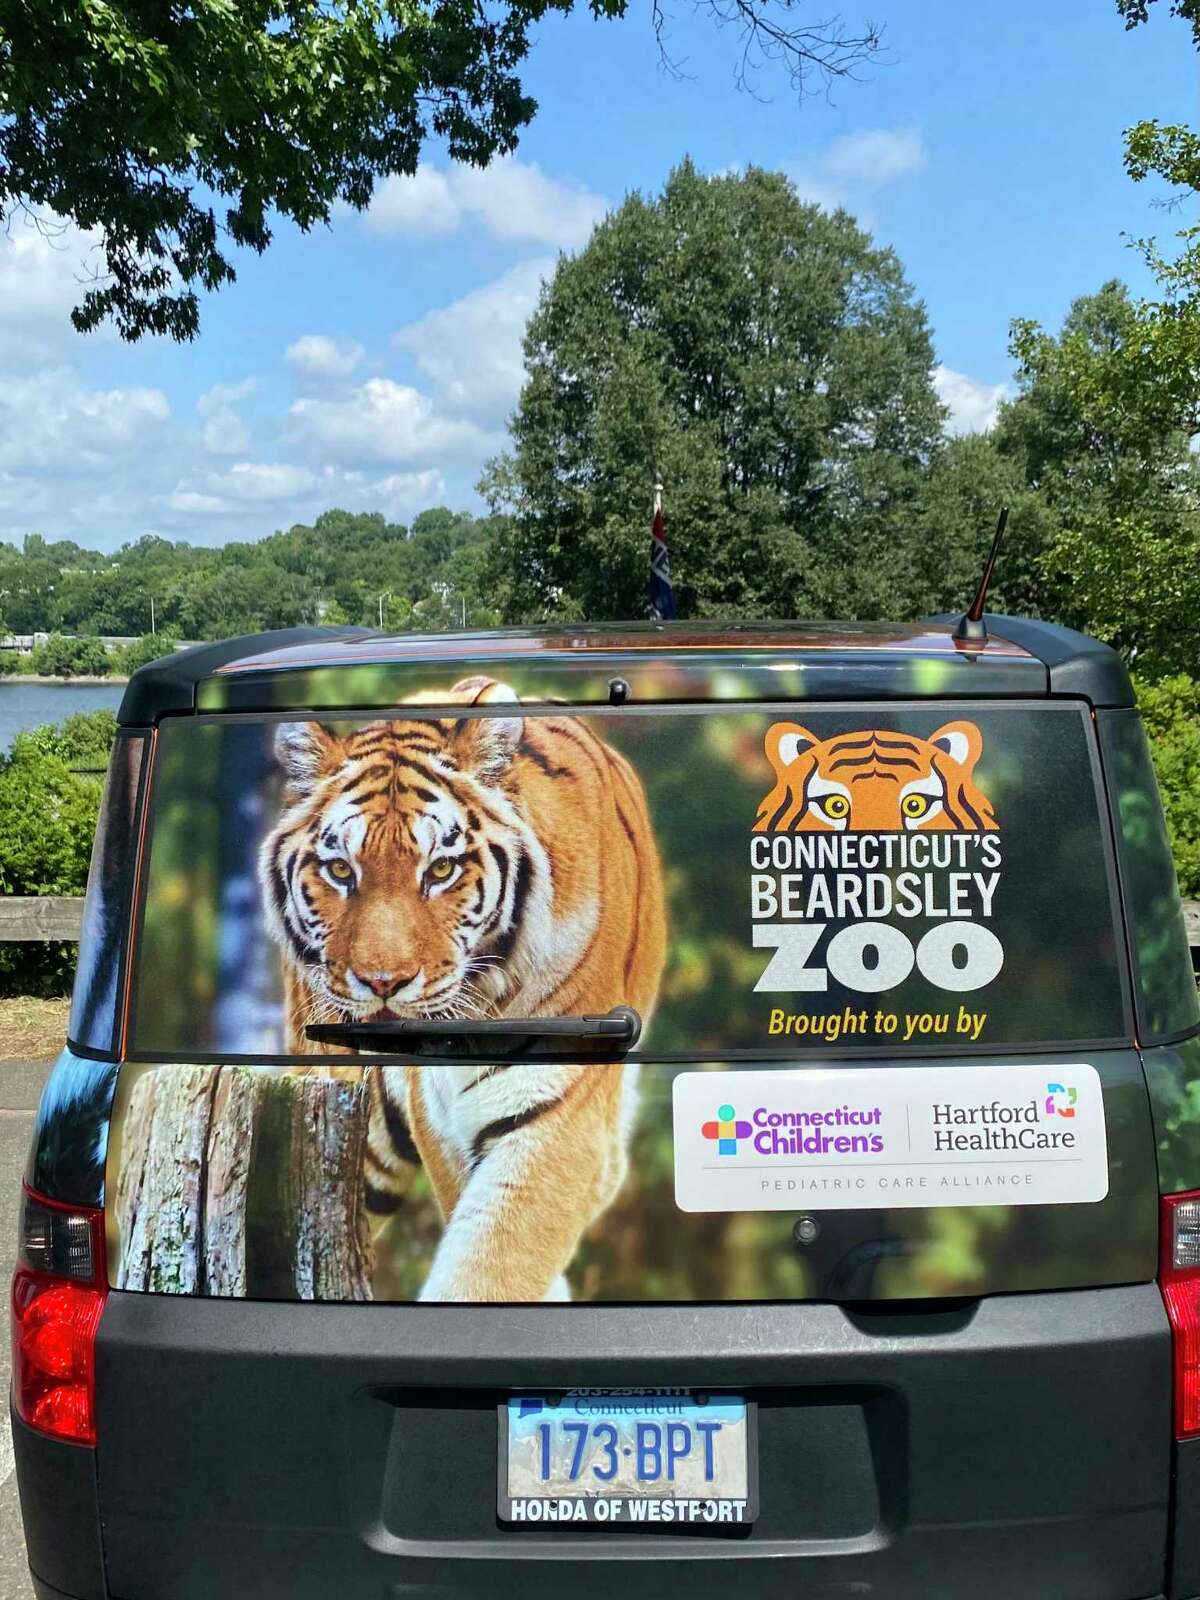 Connecticut’s Beardsley Zoo announced Aug. 18, 2022 that a second Zoomobile sponsored by the Pediatric Care Alliance with Connecticut Children’s and Hartford HealthCare is now roaring off to schools in the area.